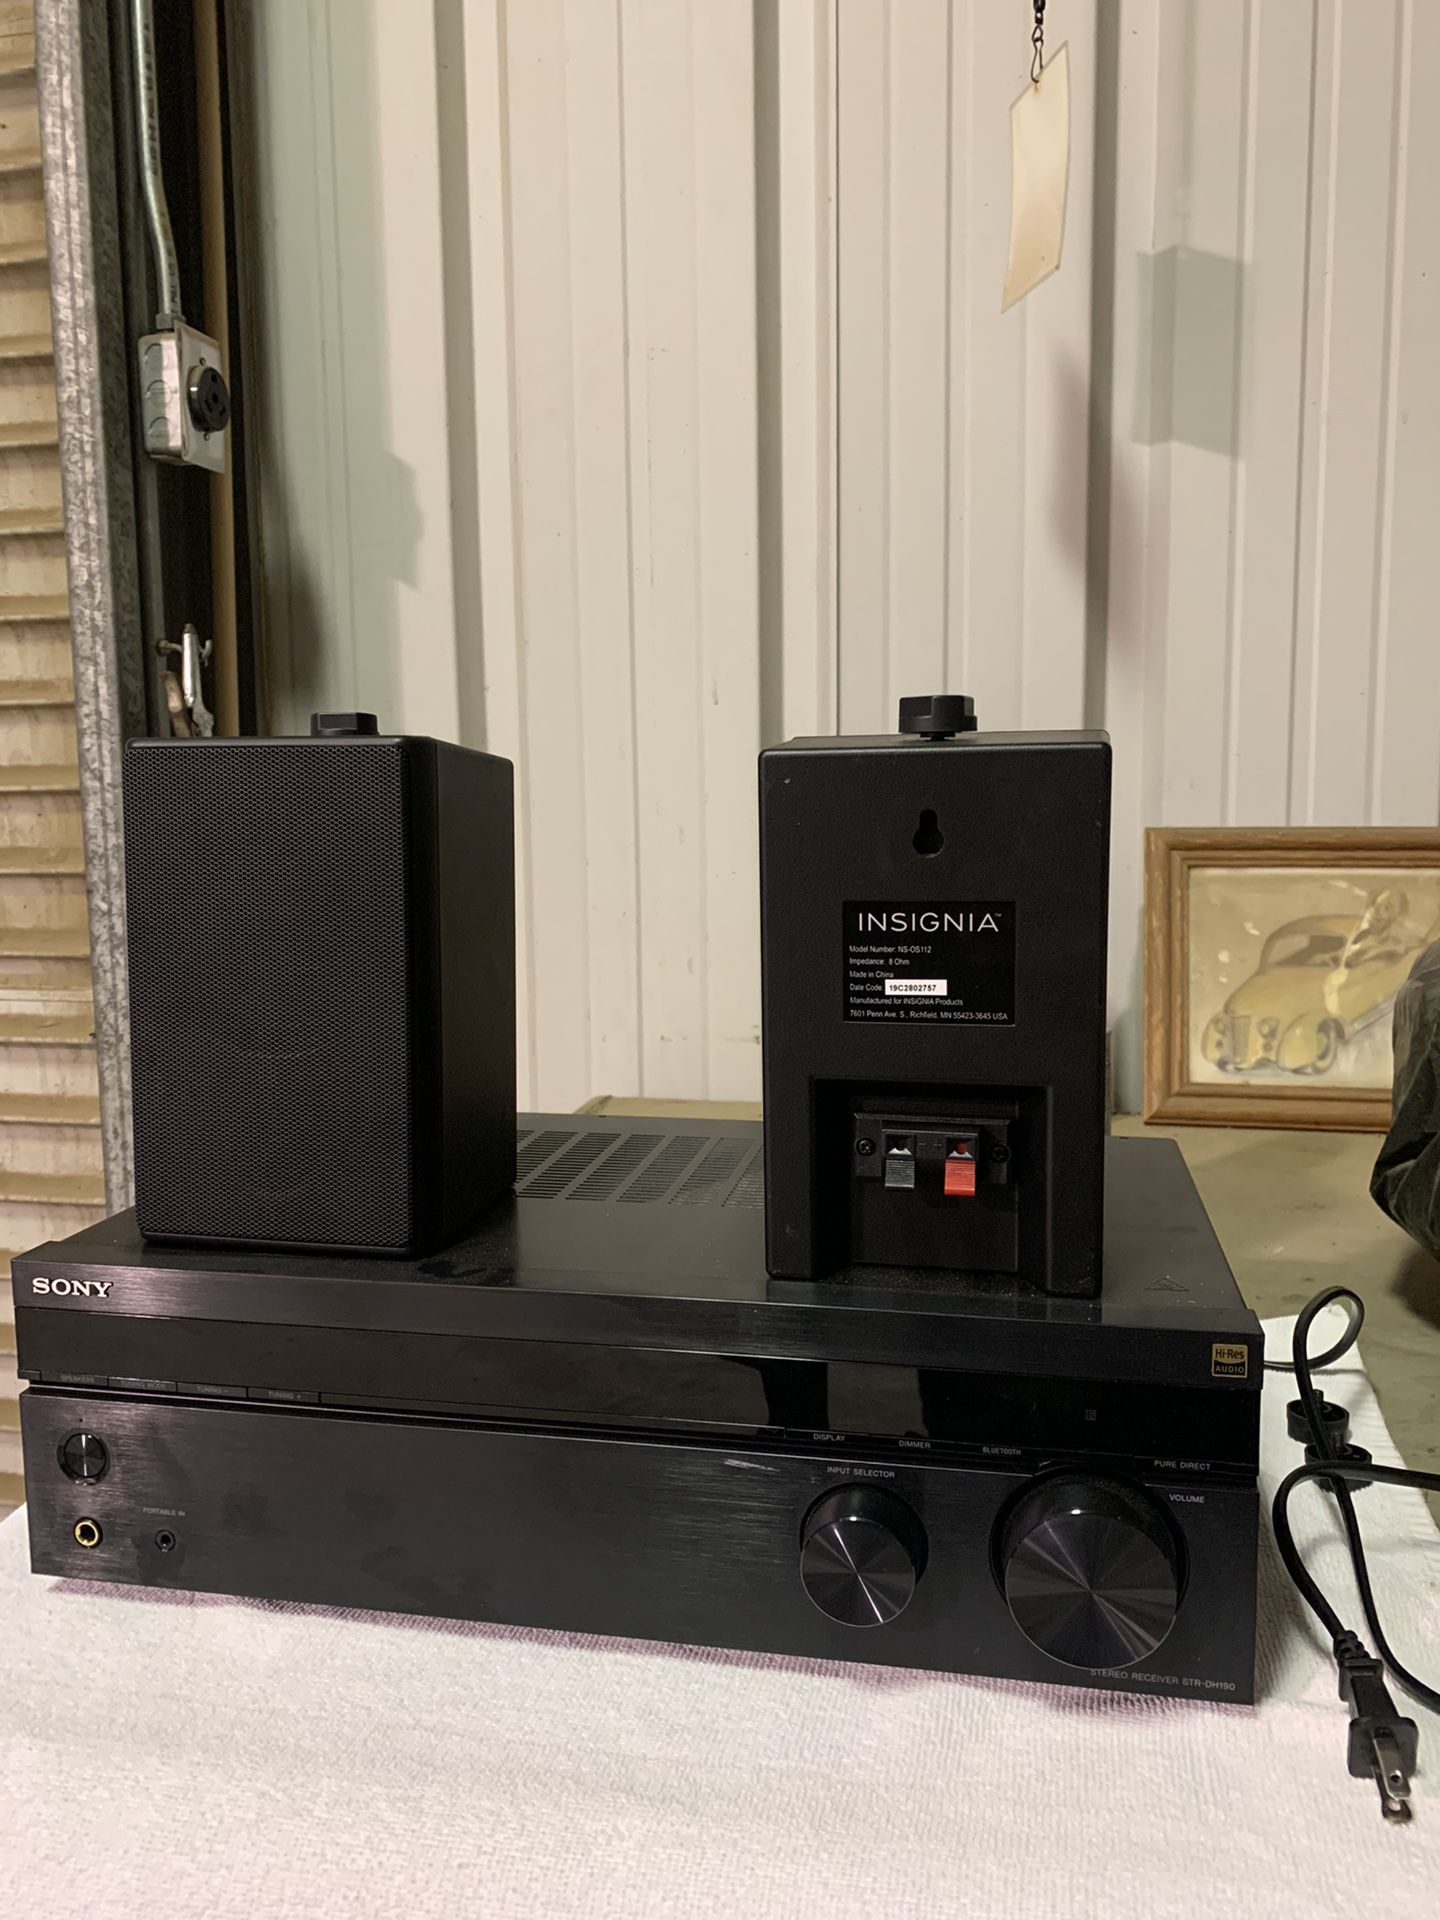 Sony Stereo System with Insignia Speakers